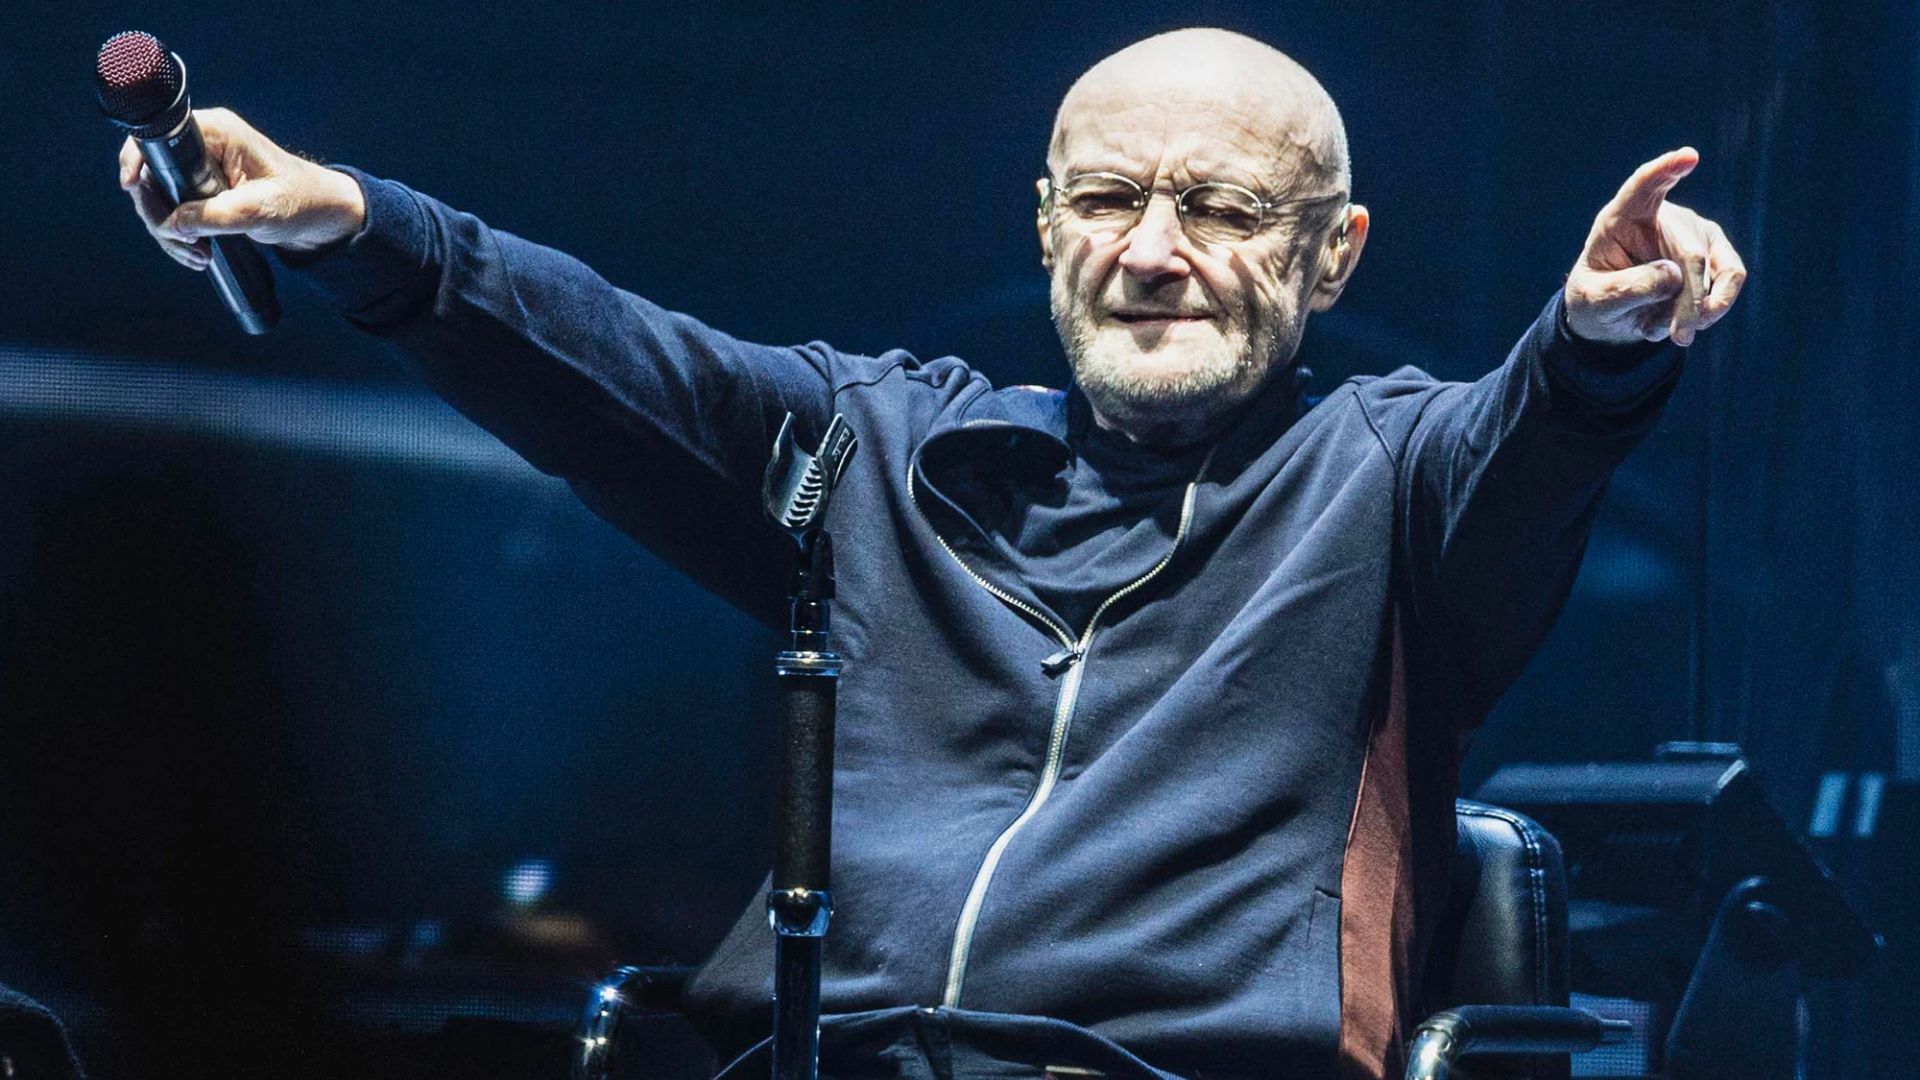 Phil Collins Pointing His Hands